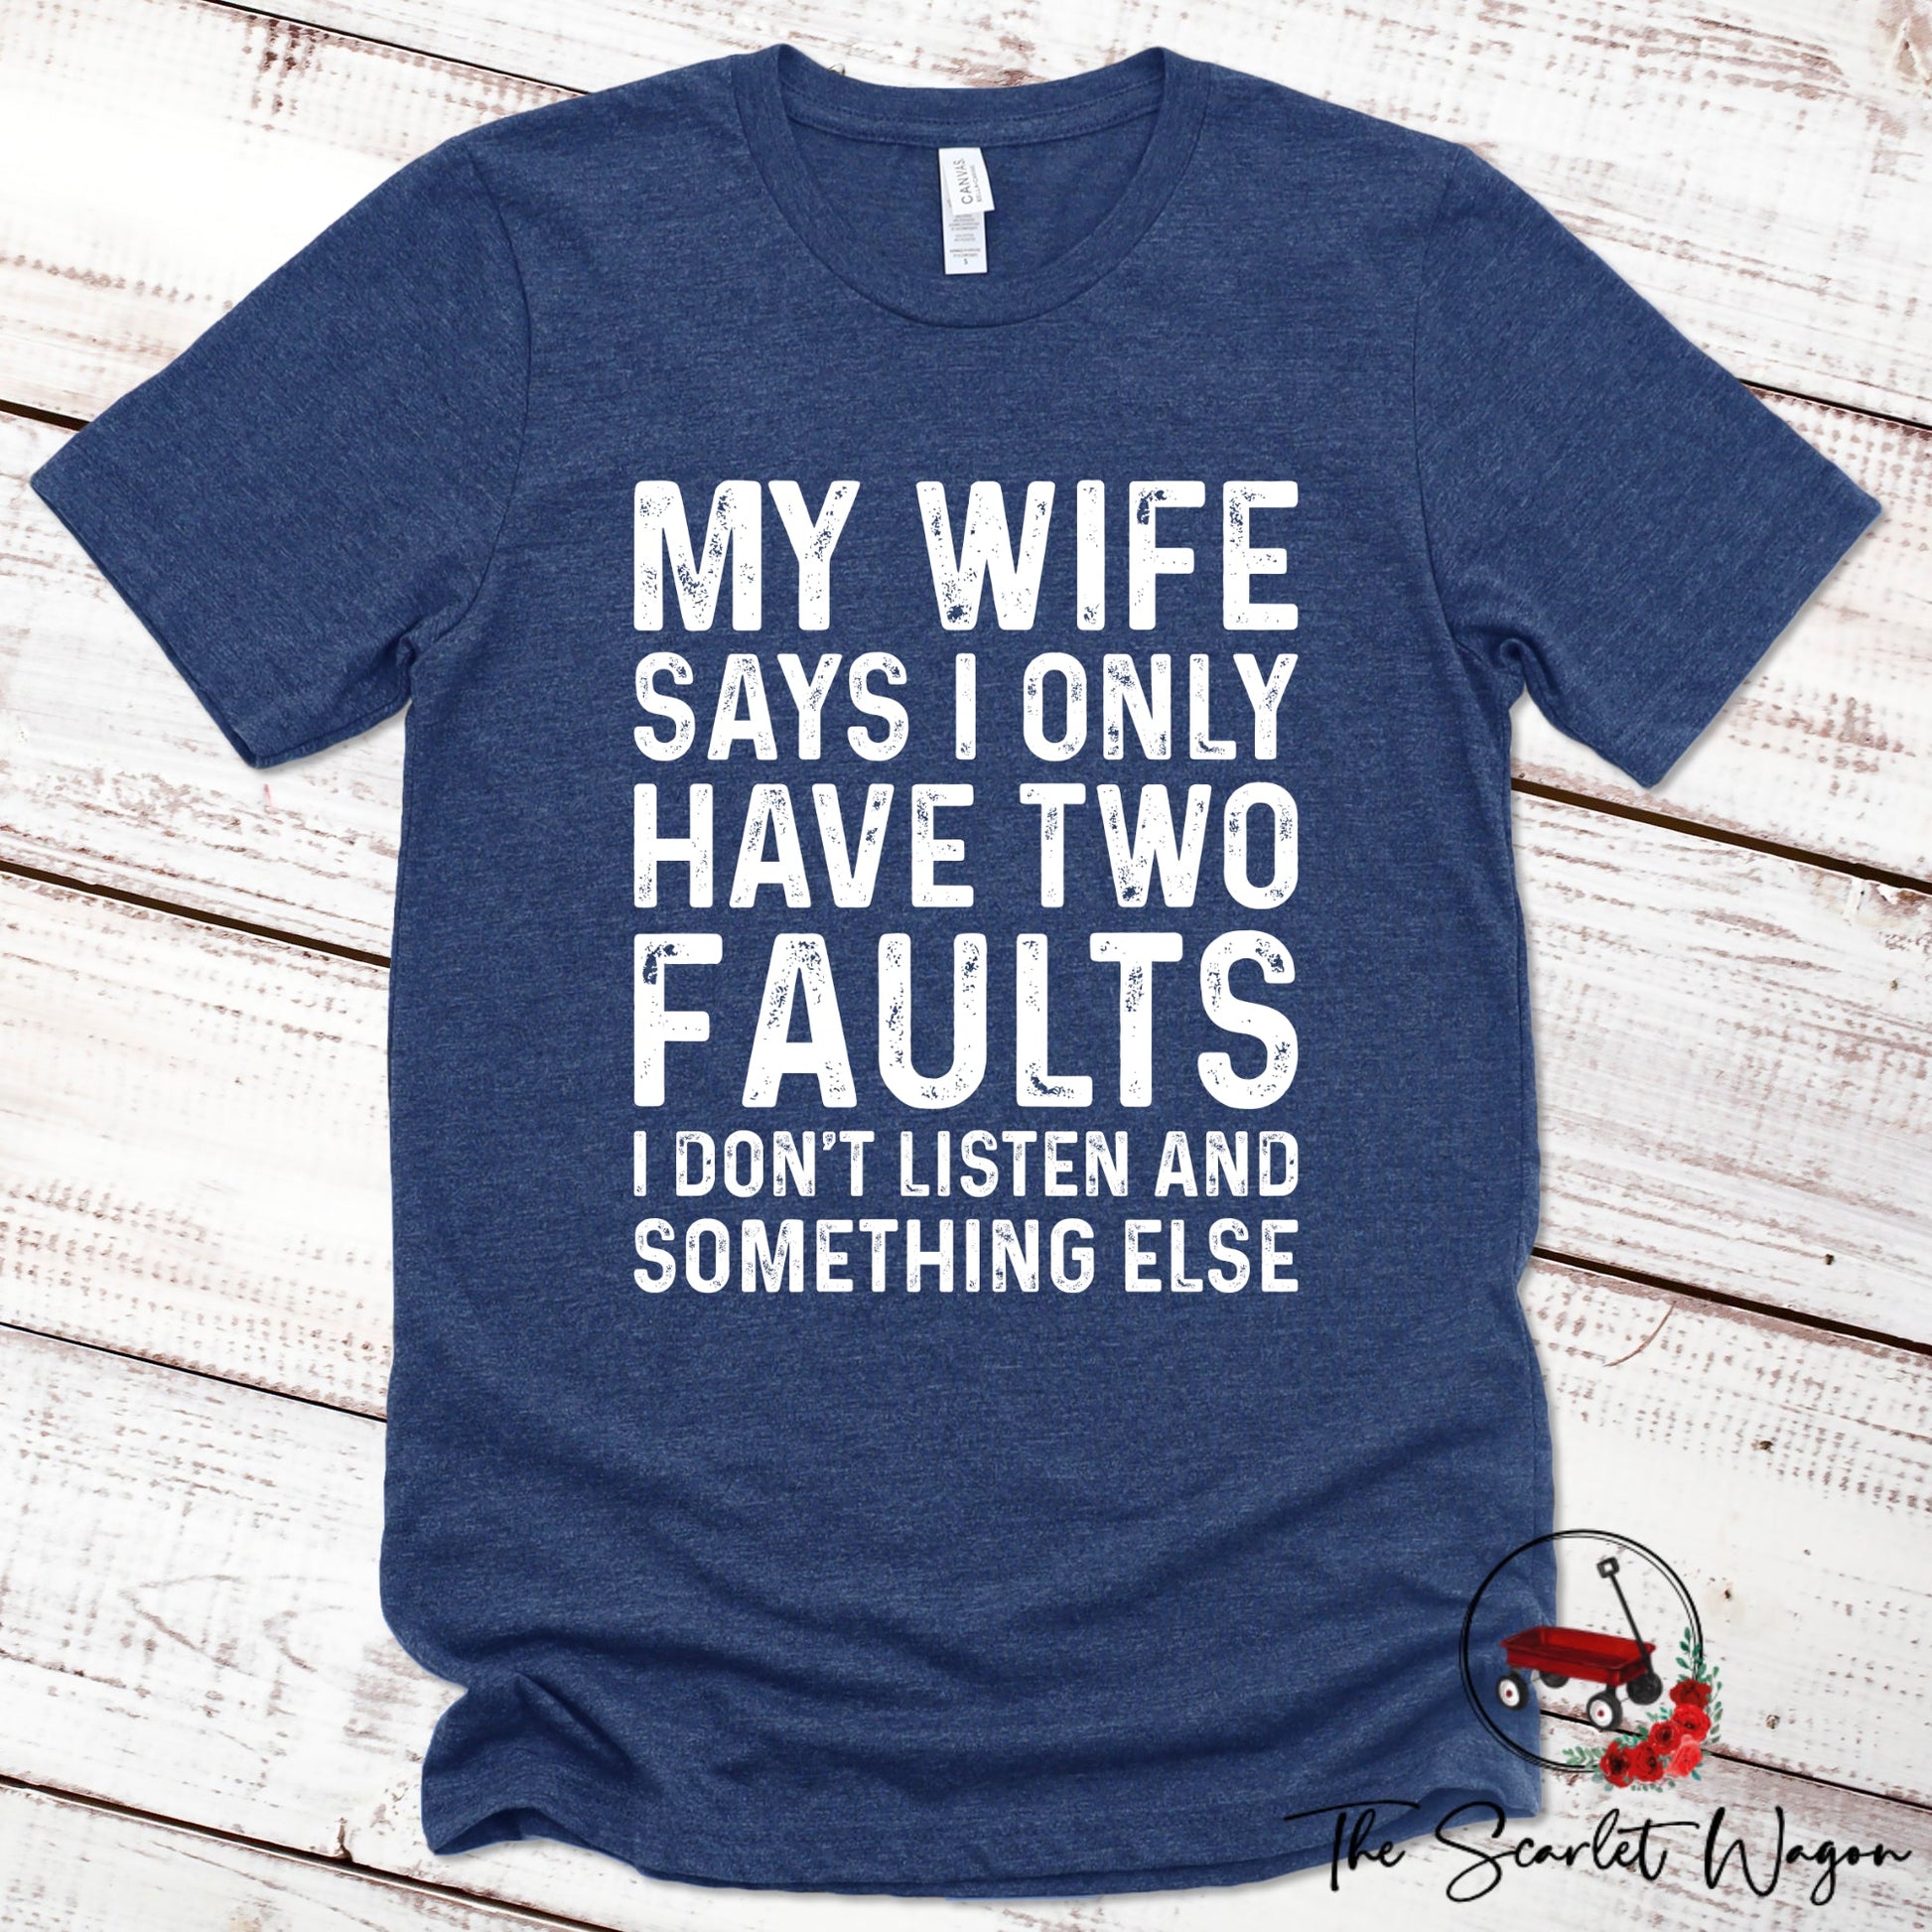 My Wife Says I Have Two Faults Premium Tee Scarlet Wagon Heather Navy XS 